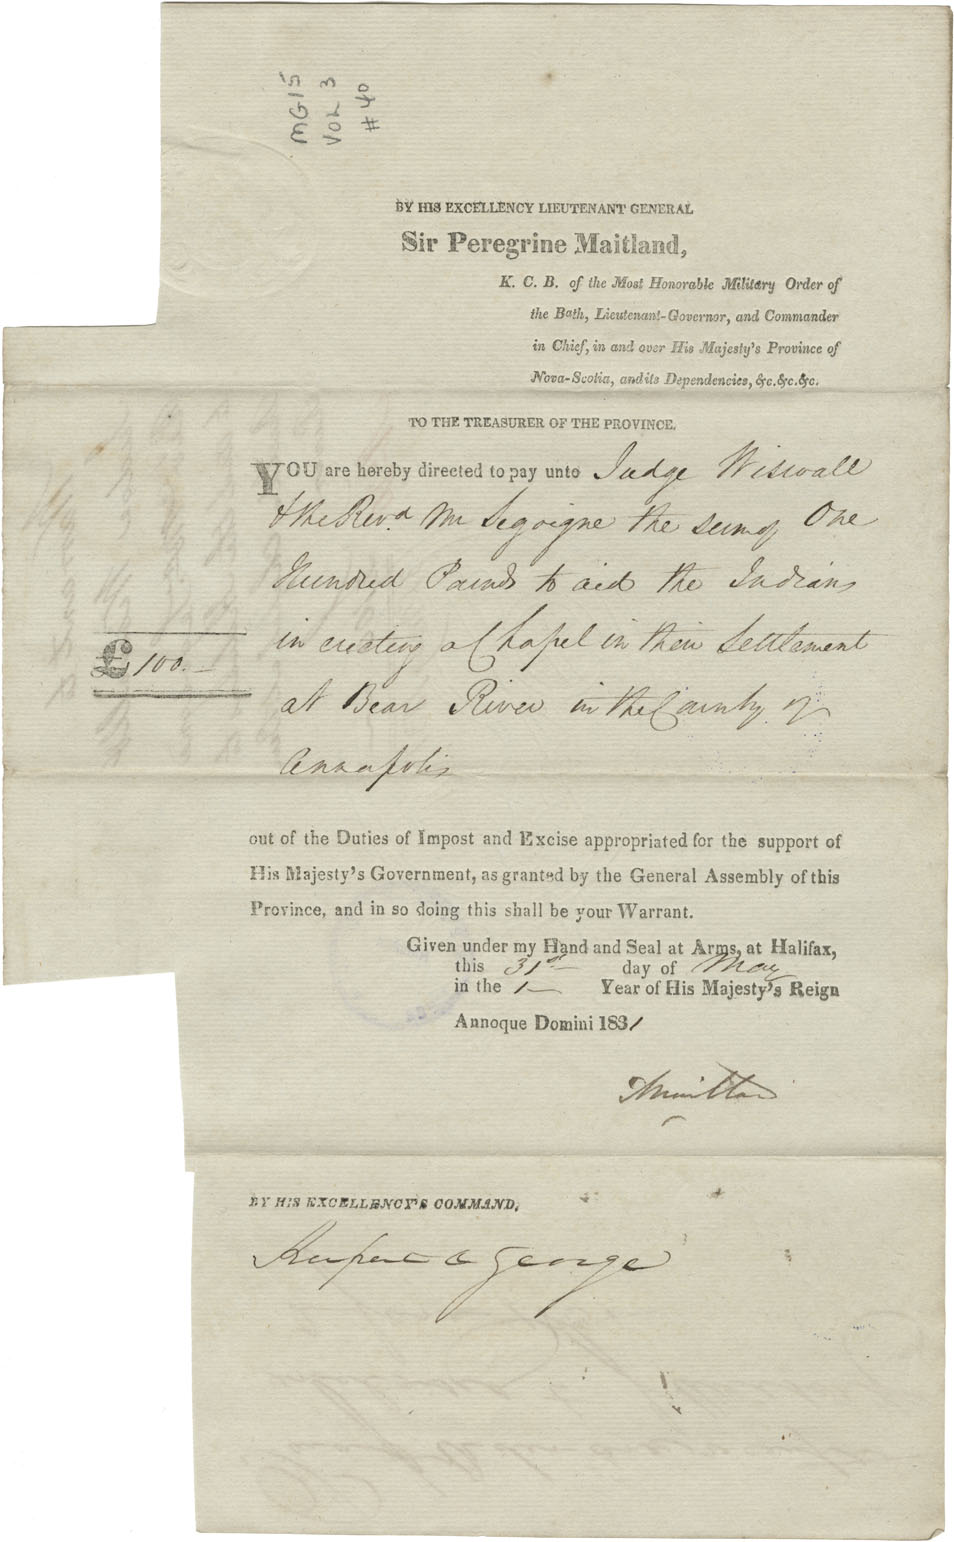 Warrant to Judge Wiswall and Rev. M. Segoigne to aid the Mi'kmaq to build a Chapel at Bear River, from Sir Peregrine Maitland. 